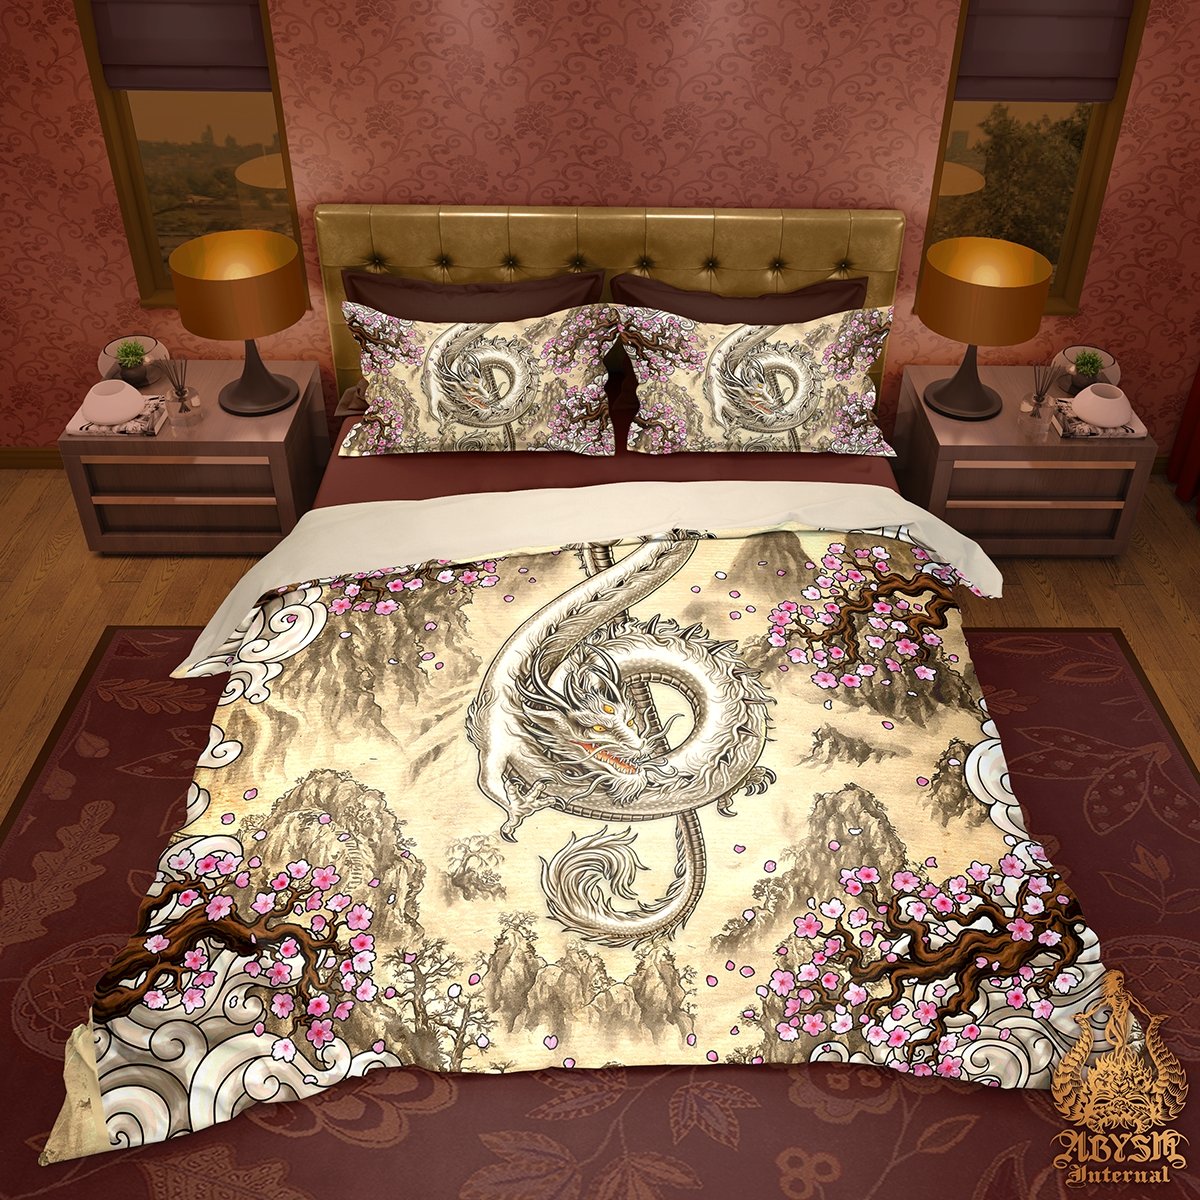 Chinese Dragon Bedding Set, Comforter and Duvet, Indie Bed Cover and Bedroom Decor, Music Art, King, Queen and Twin Size - Asian Painting - Abysm Internal